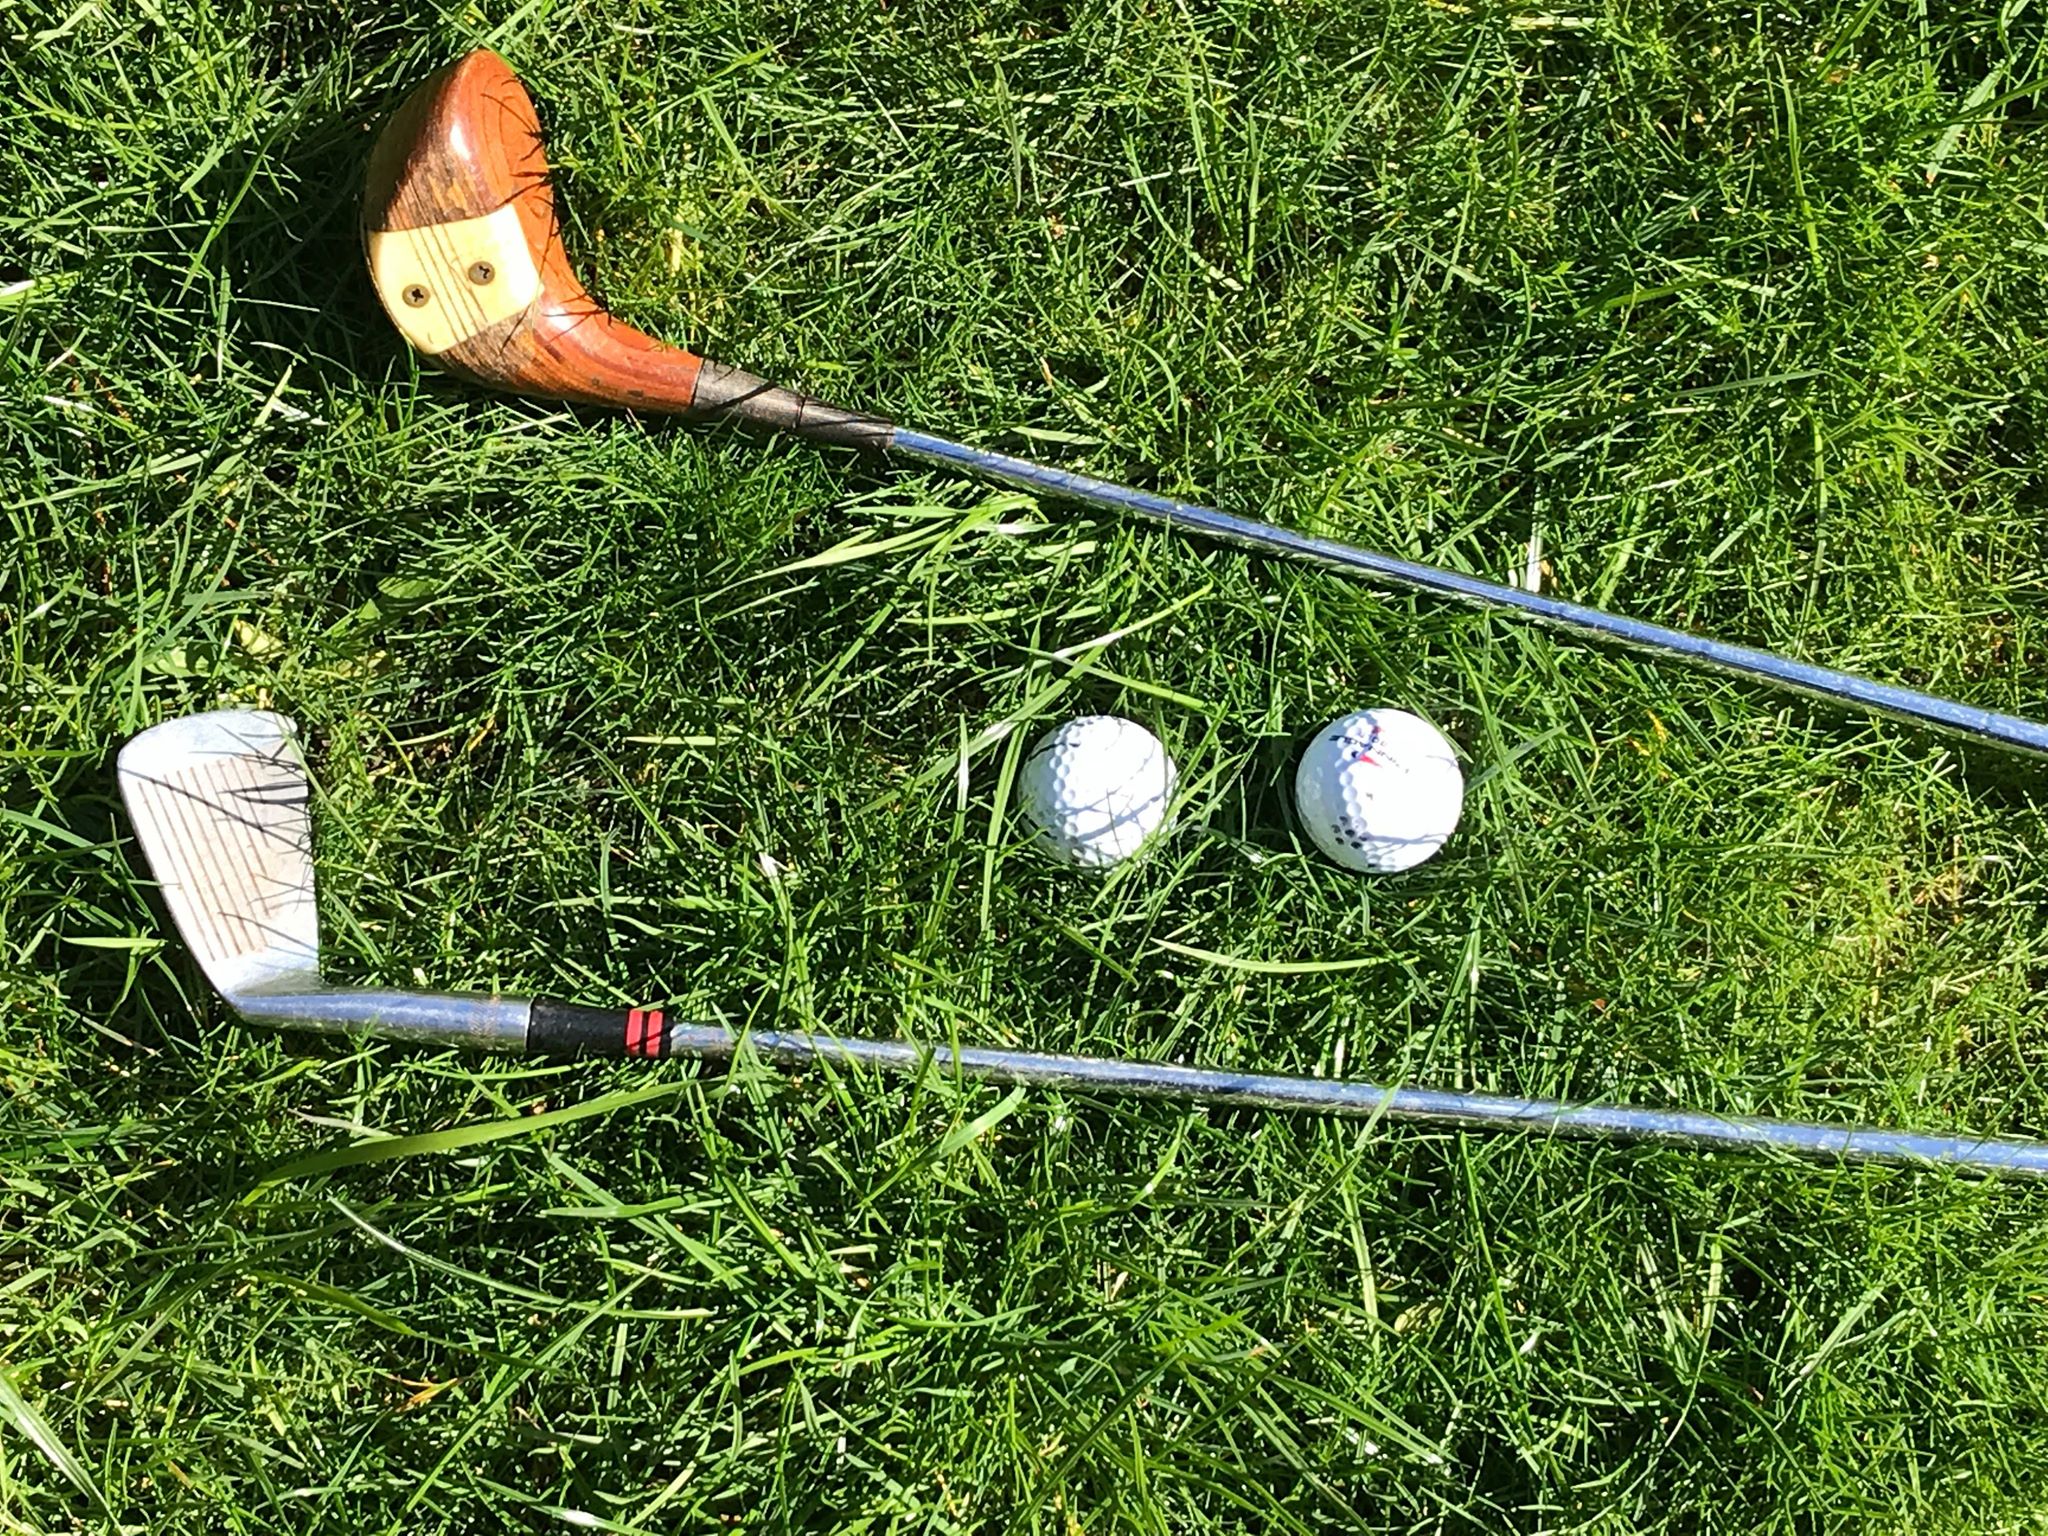 A set of golf clubs and balls on the grass.